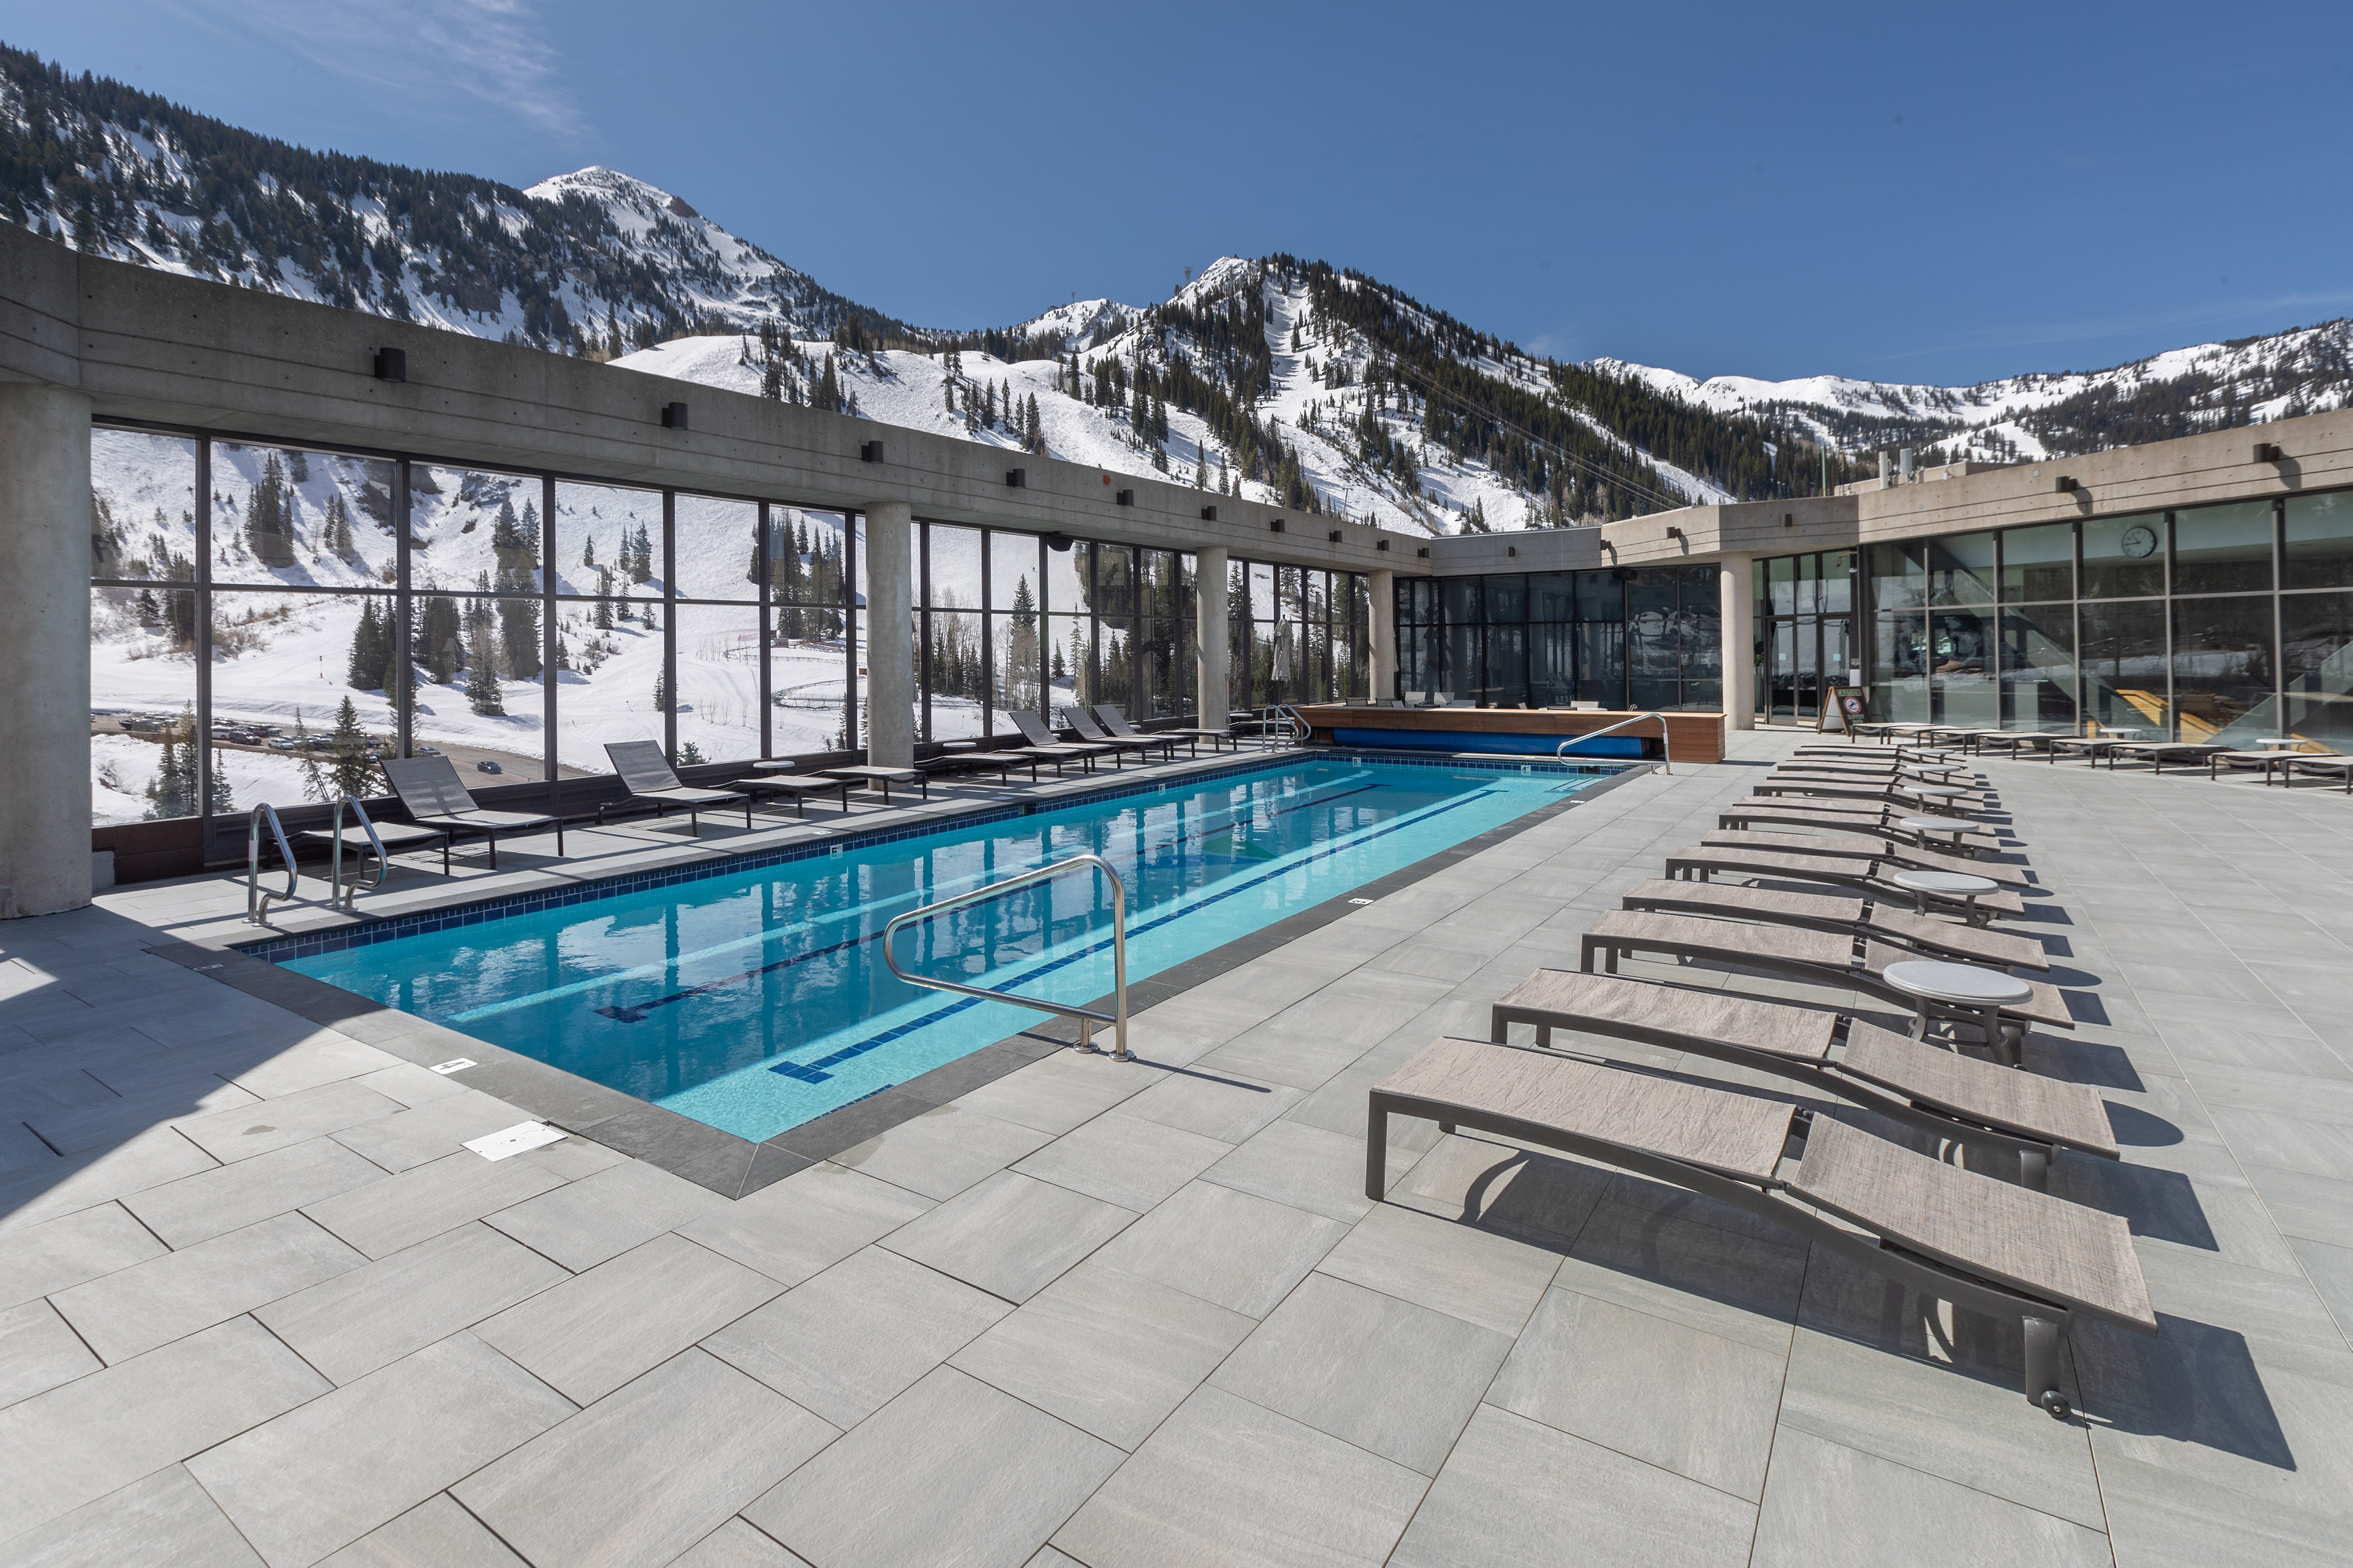 The Cliff Spa winter relaxation at Snowbird